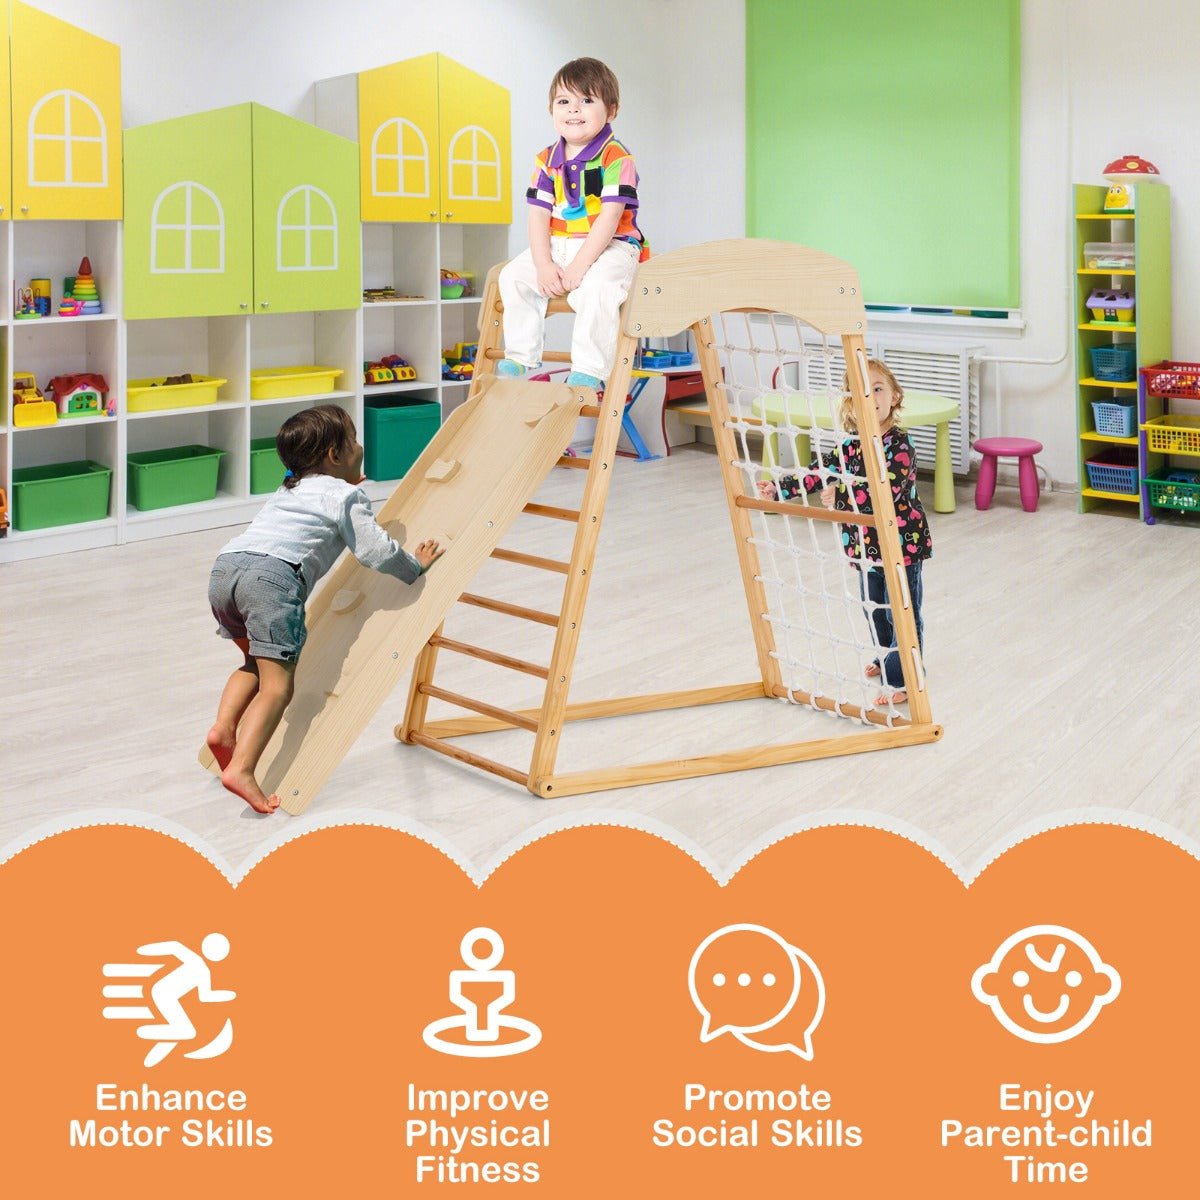 All-in-One Jungle Gym Playset for Children